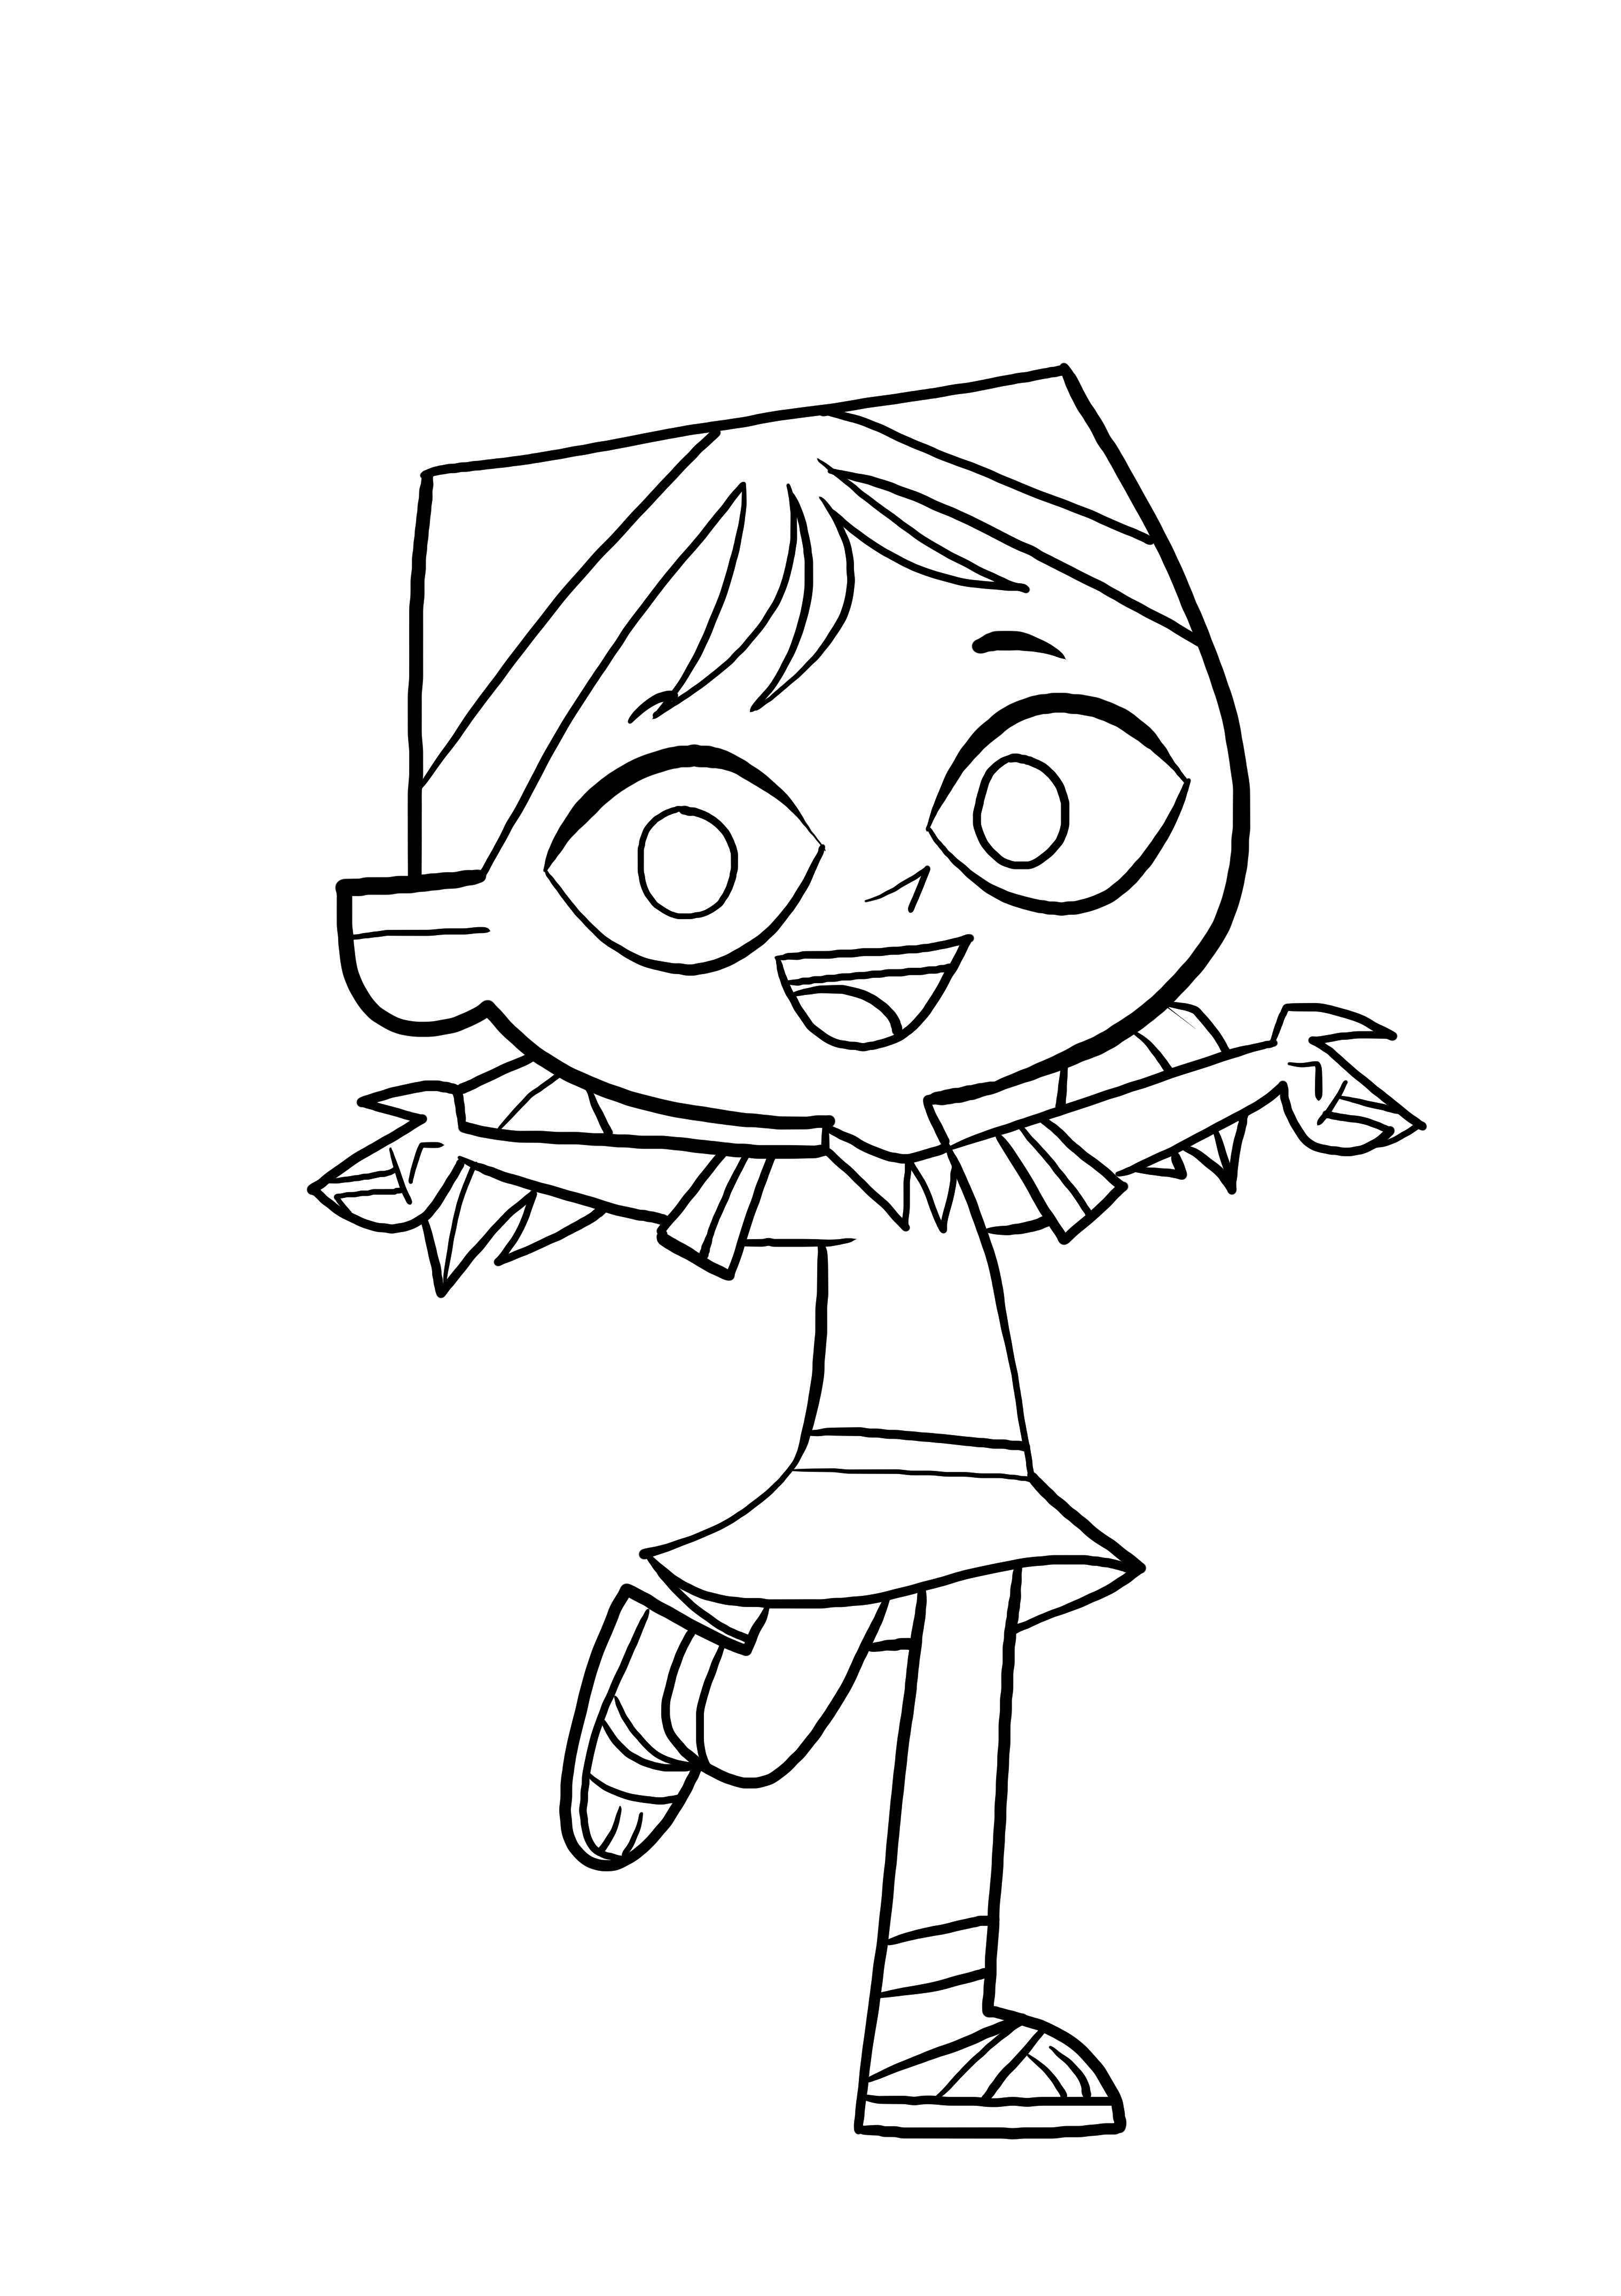 Courtney from Total DramaRama coloring page to print and coloring